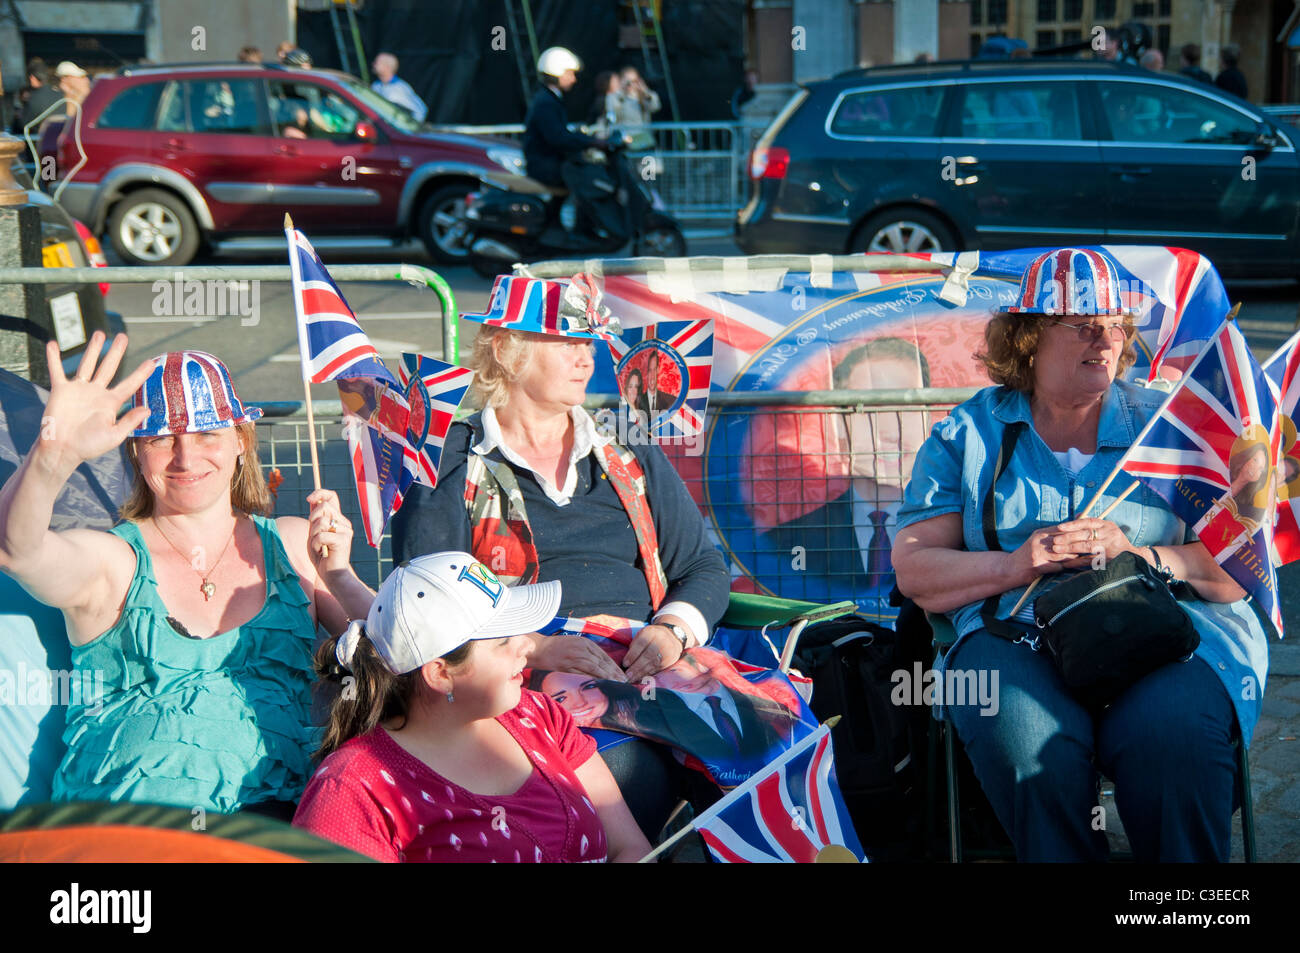 Royal family fans camp to secure a good spot at Westminster Abbey for Prince William and Catherine Middleton's royal wedding celebration to take place Stock Photo